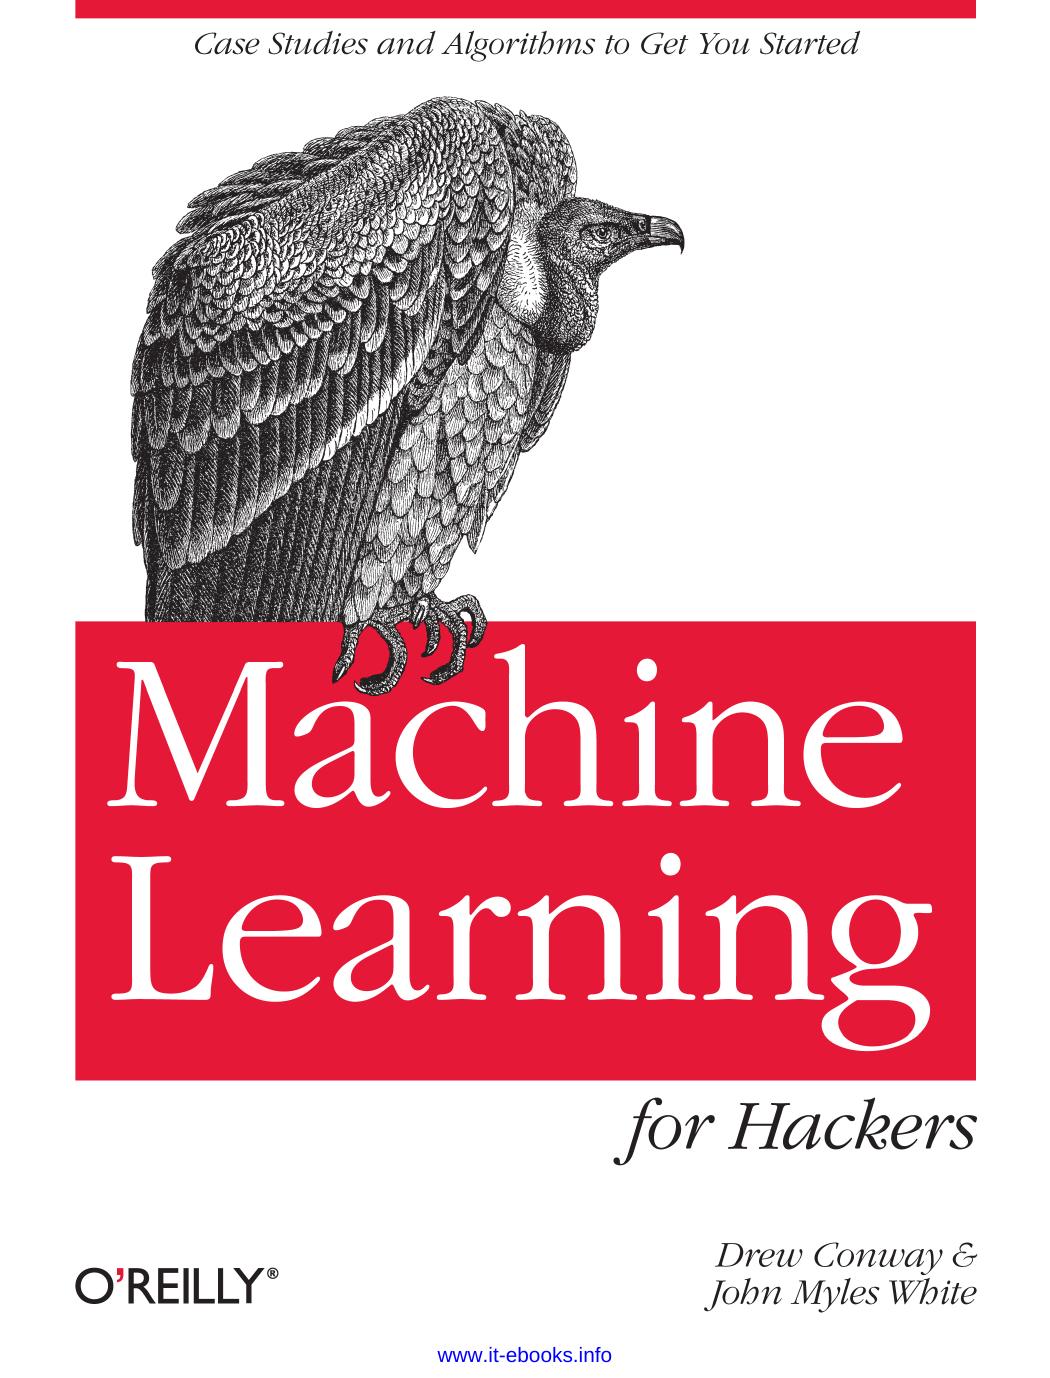 Machine Learning for Hackers by Drew Conway & John Myles White